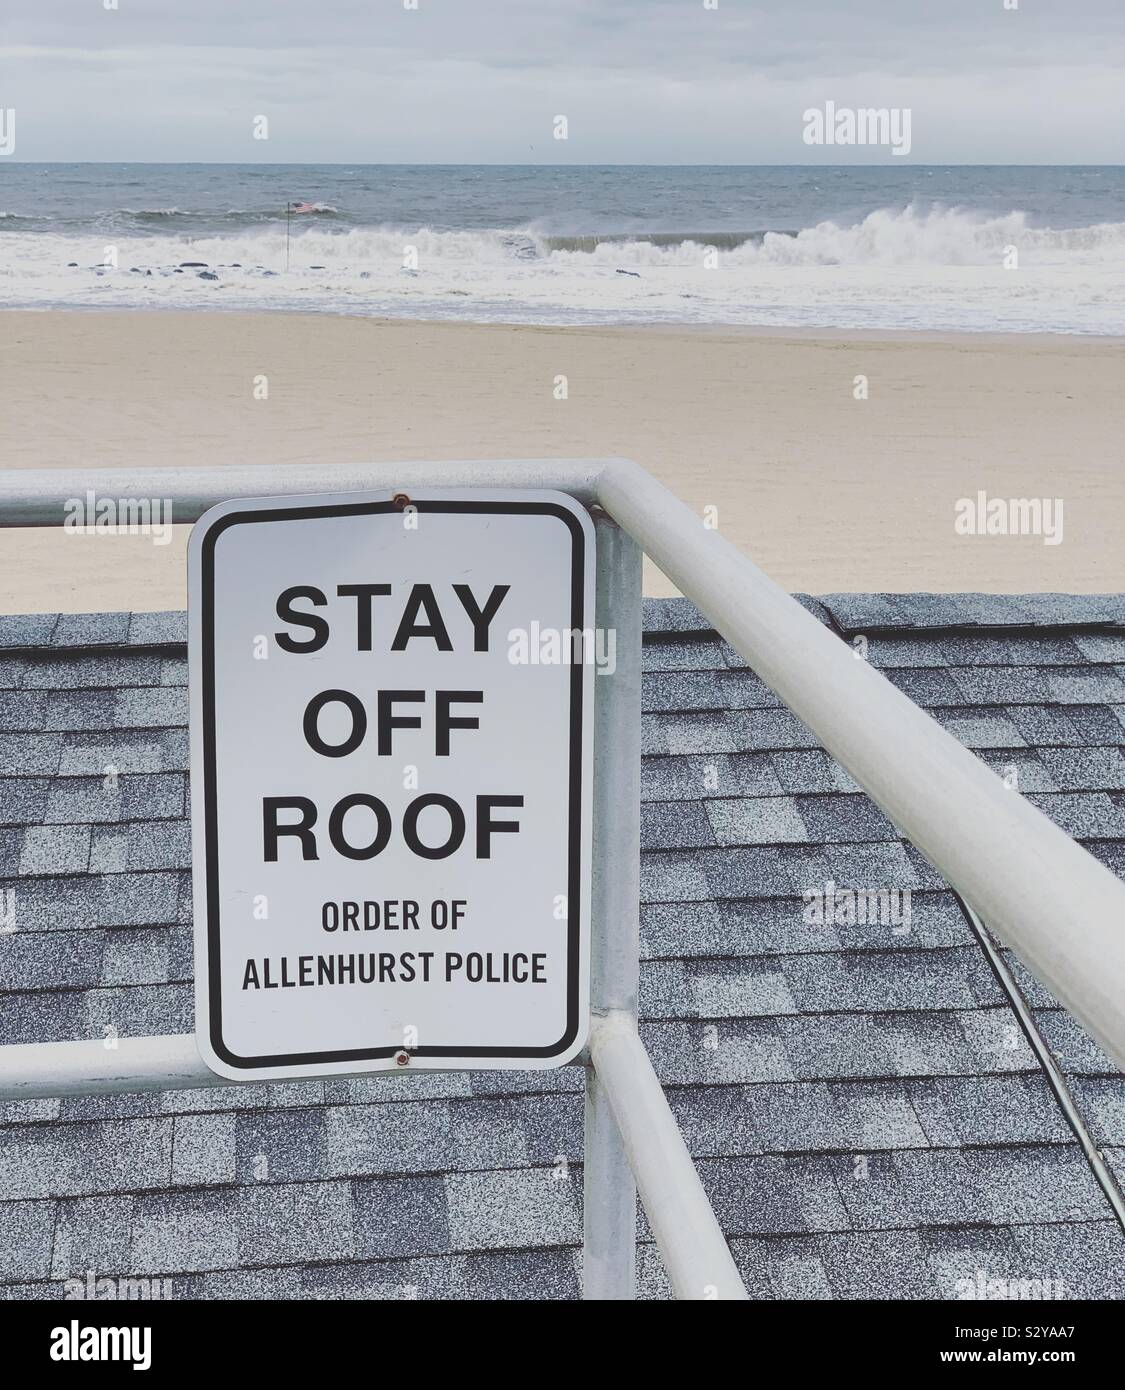 “Stay Off Roof” sign on the boardwalk over the Beach Club Cabanas, Allenhurst, Monmouth County, New Jersey, United States Stock Photo